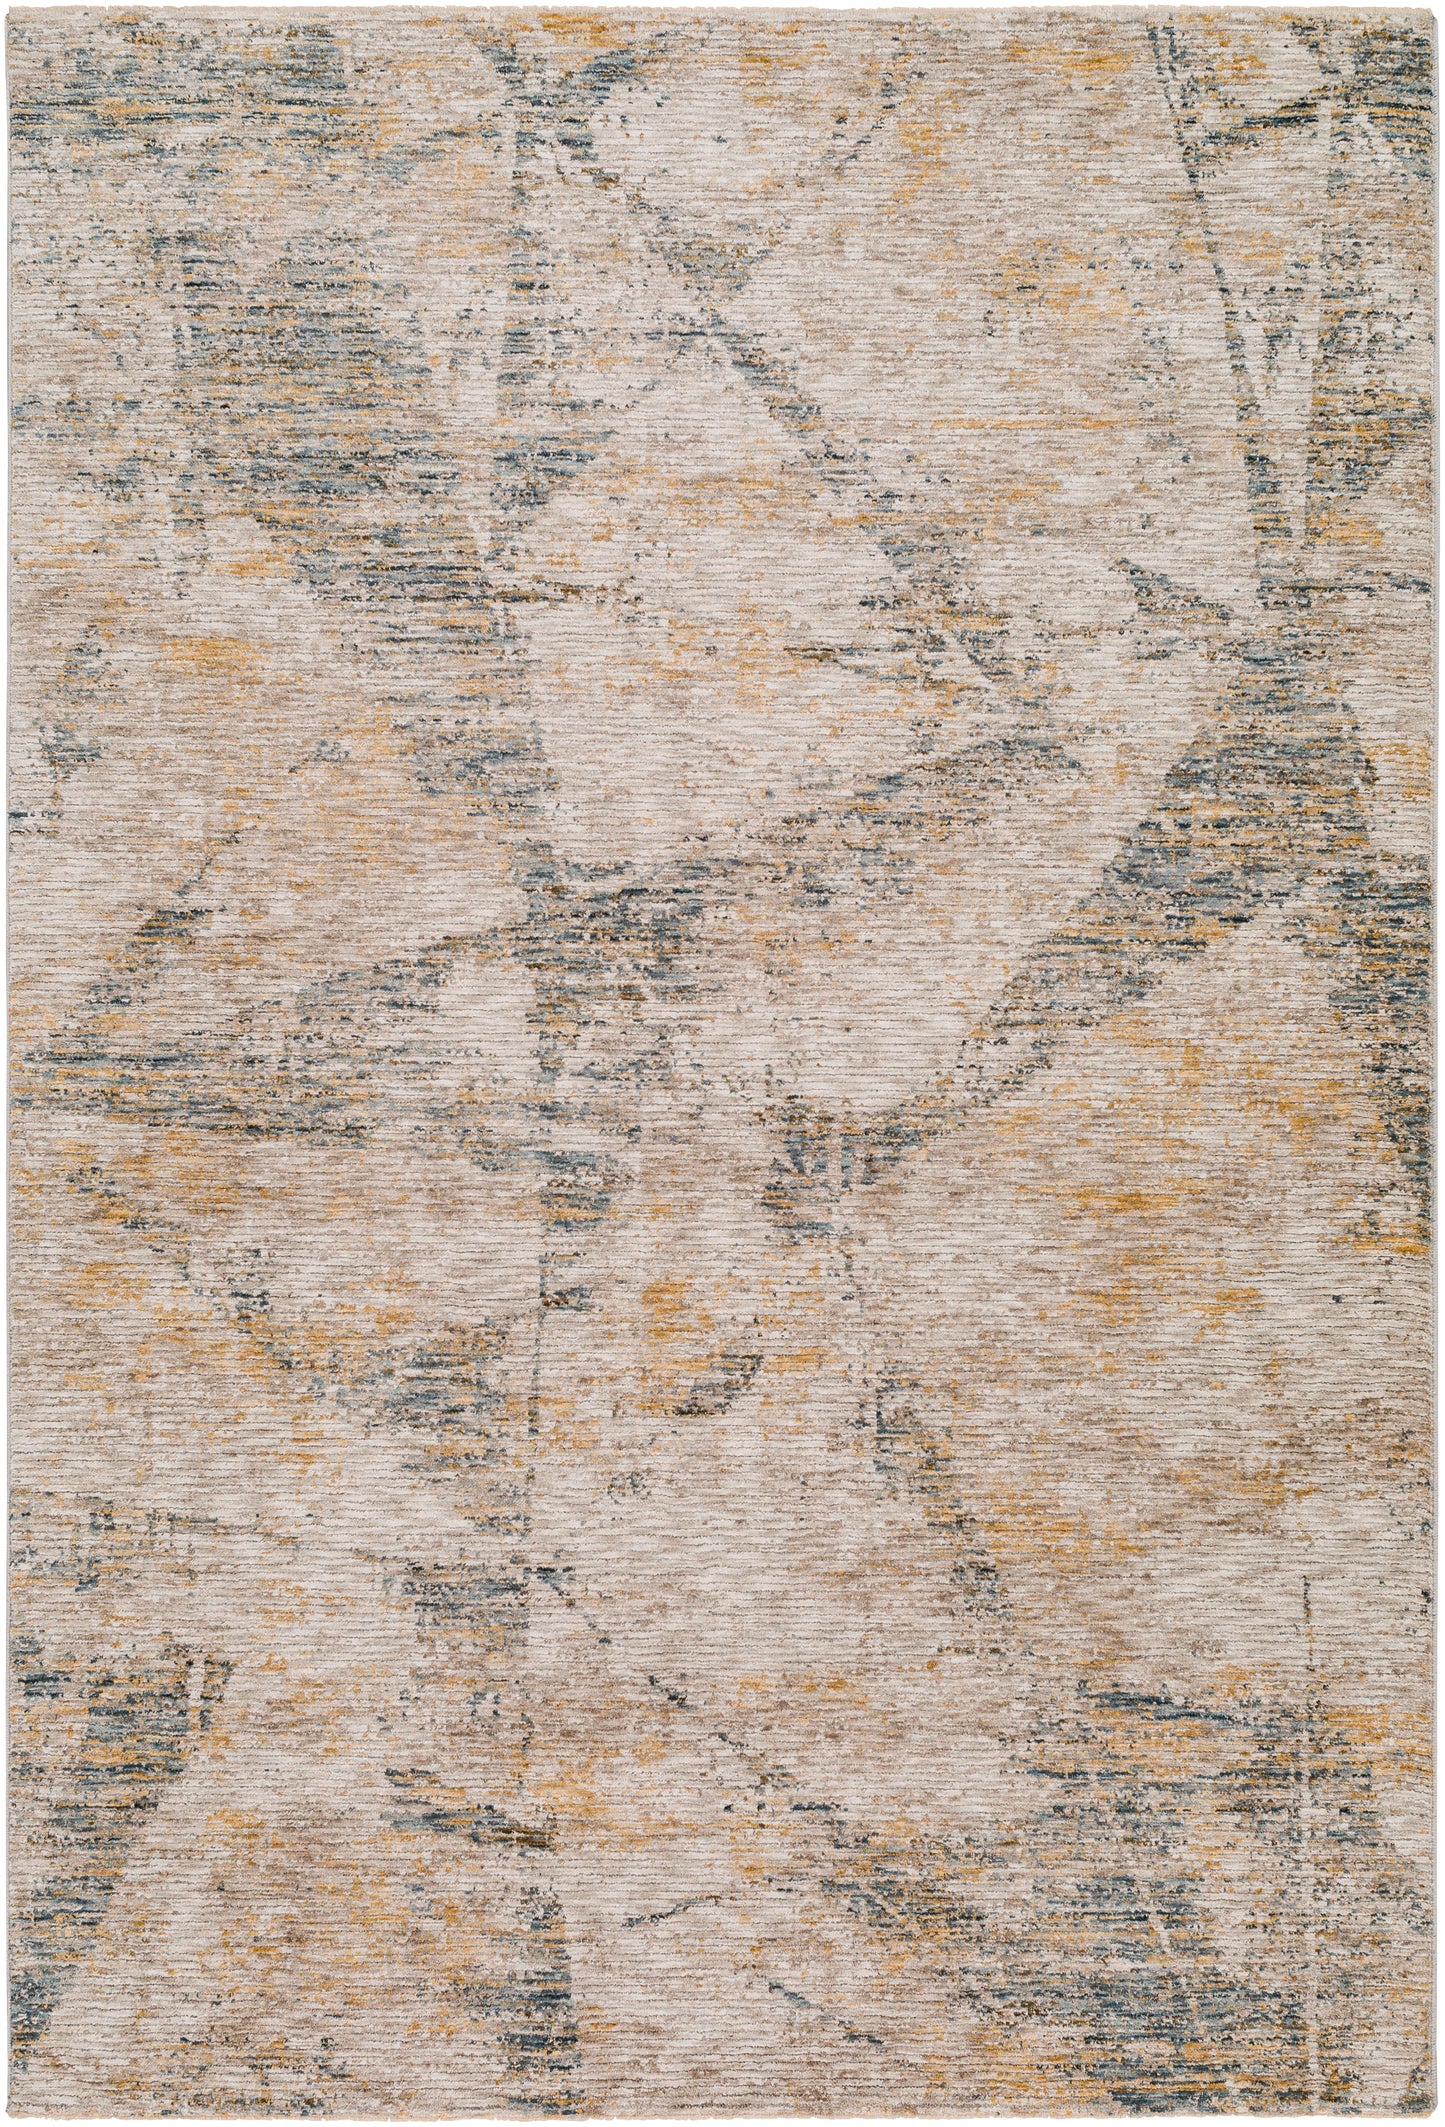 Naila 31170 Machine Woven Synthetic Blend Indoor Area Rug by Surya Rugs